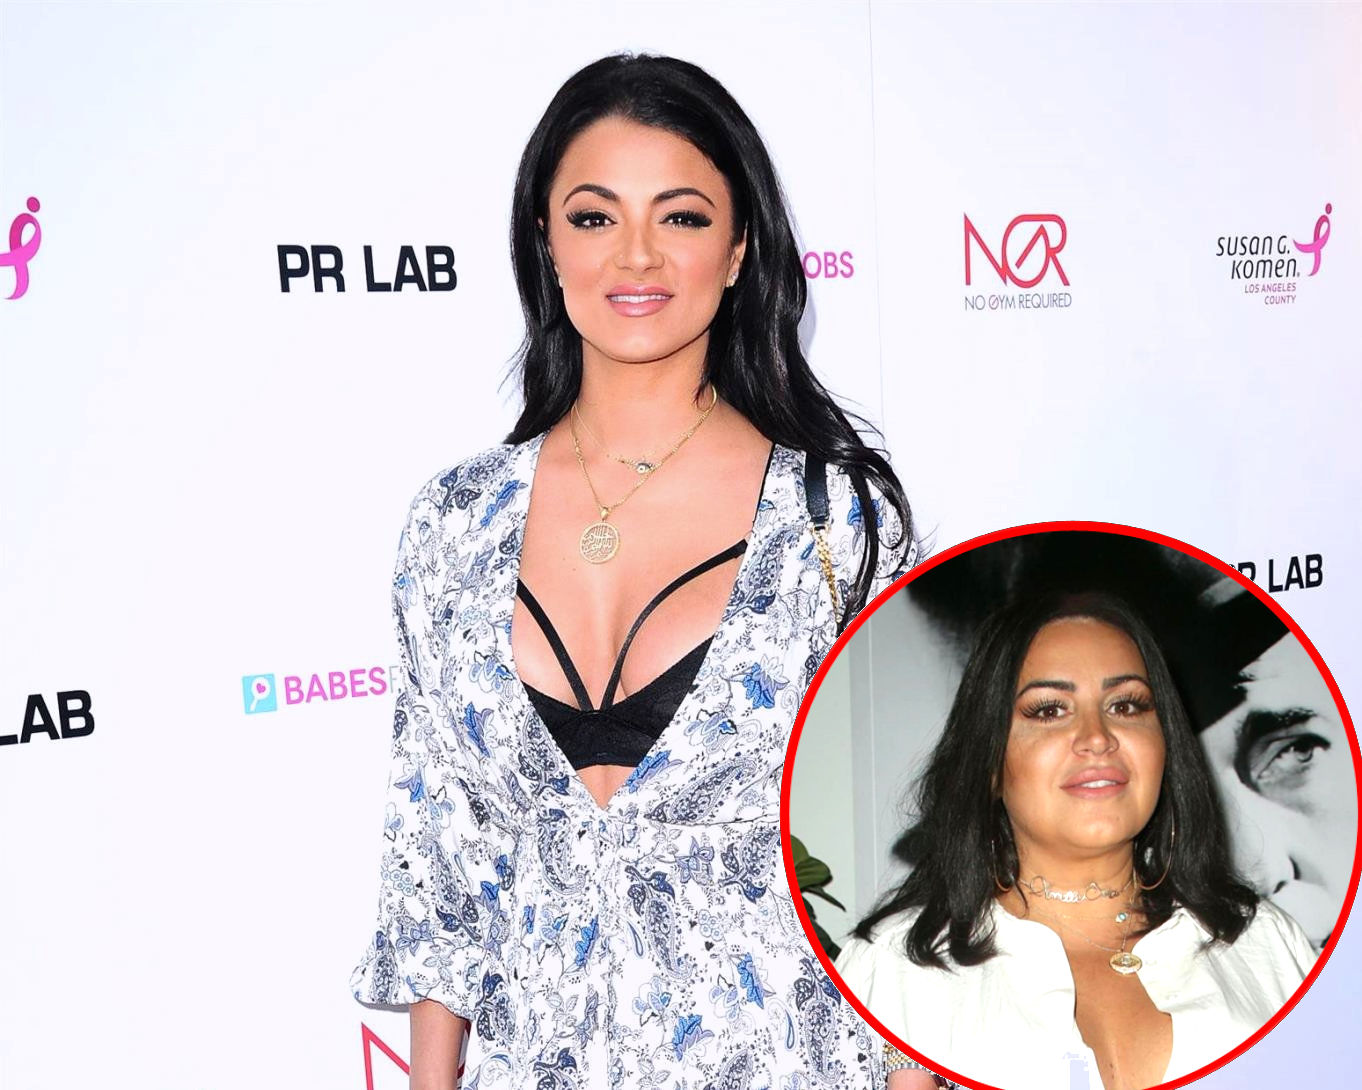 PHOTOS: Shahs of Sunset's Golnesa 'GG' Gharachedaghi Celebrates Baby Shower With Costars! Plus She Explains Why Mercedes 'MJ' Javid is Finally Getting Her "Karma"